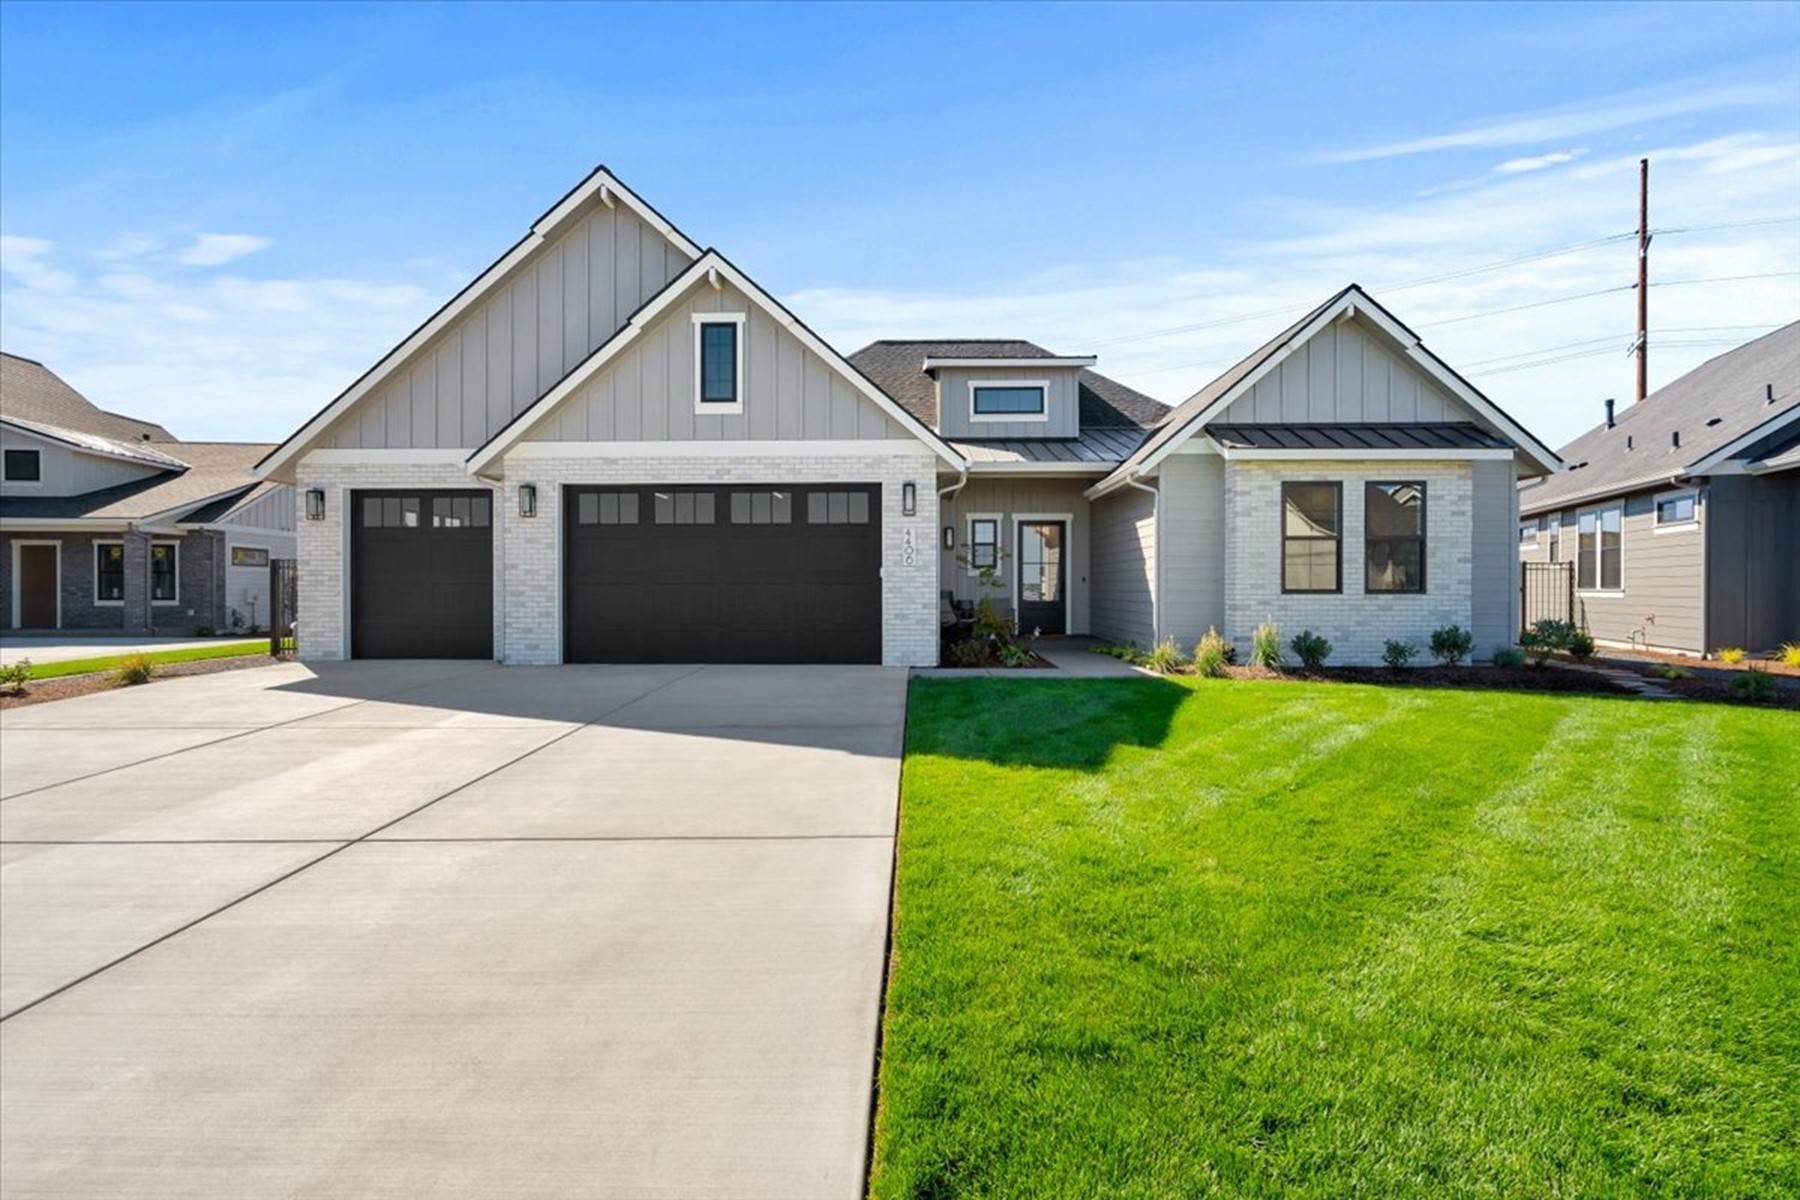 Single Family Homes for Sale at Stunning Estate Home! 4406 W Enclave Way Coeur d’Alene, Idaho 83815 United States